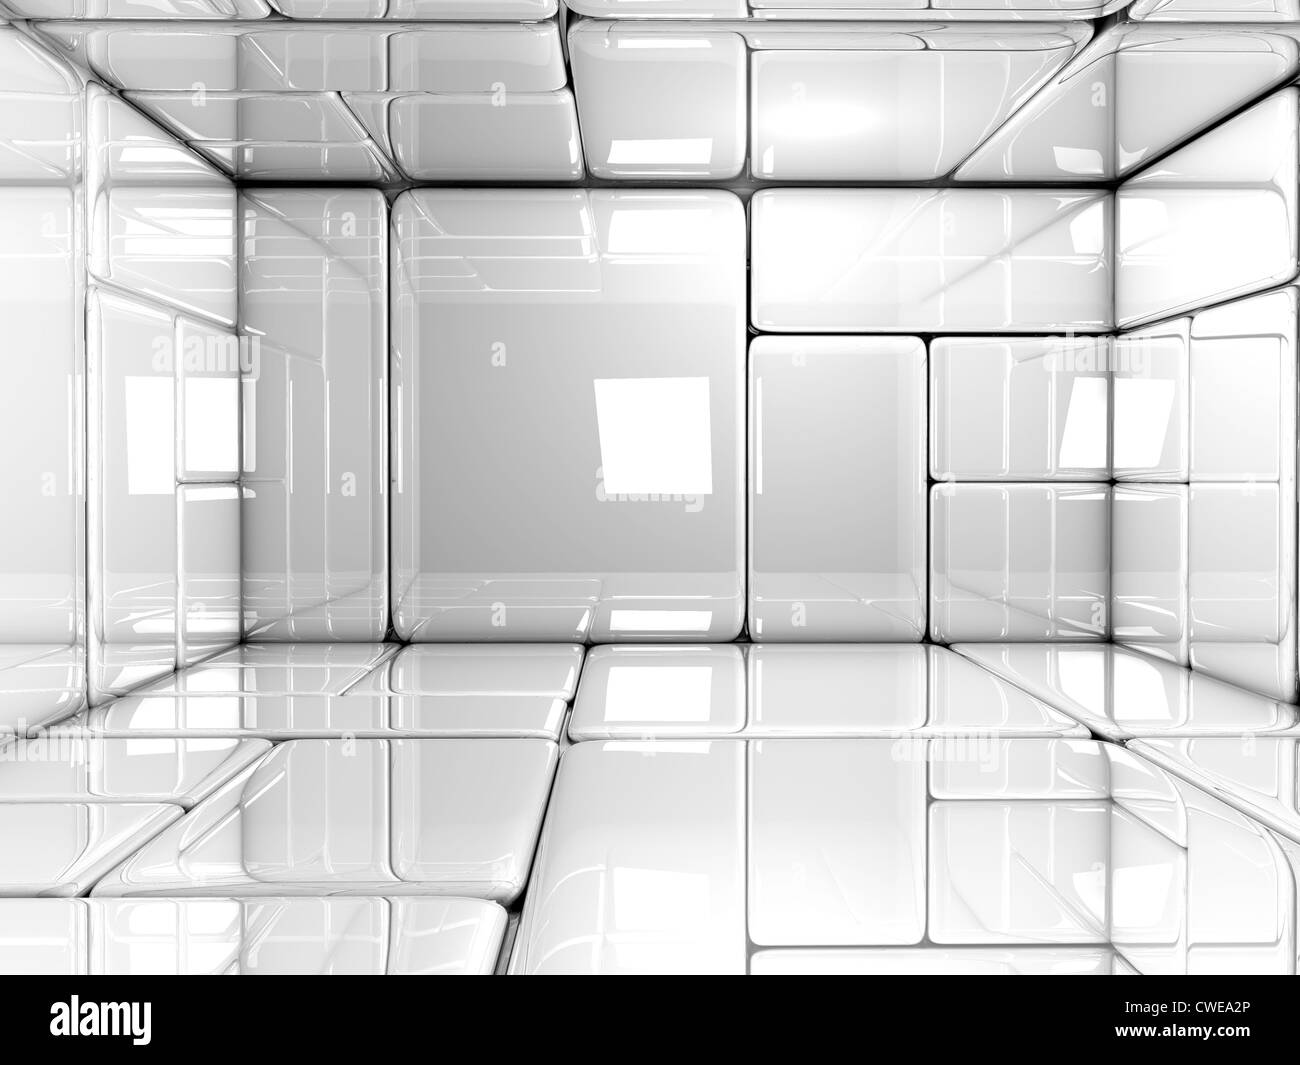 Padded room Black and White Stock Photos & Images - Alamy